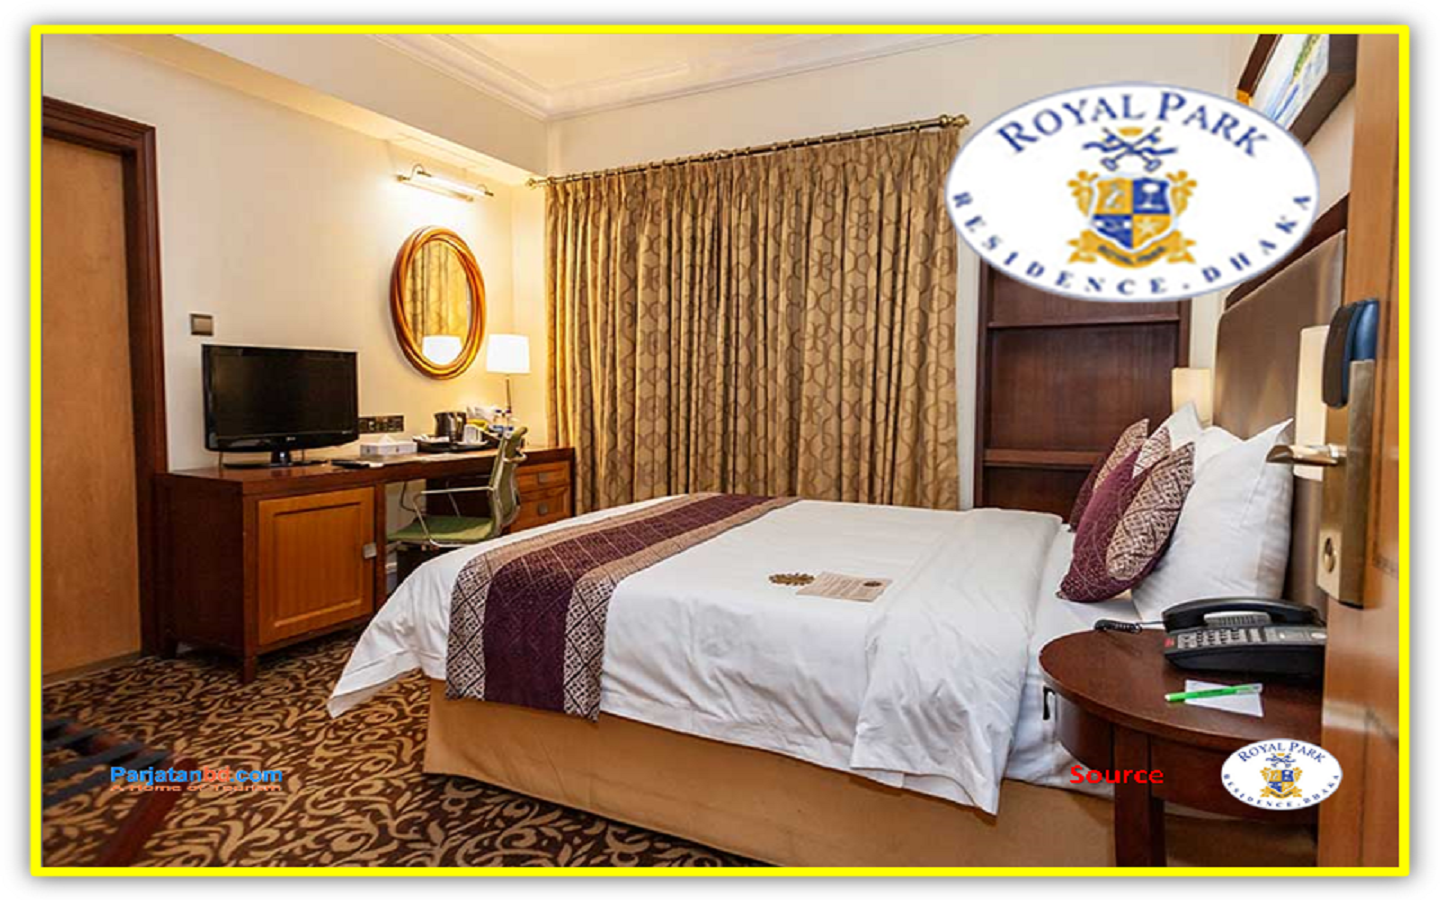 Room Queen Room  -1, Royal Park Residence Hotel, Banani